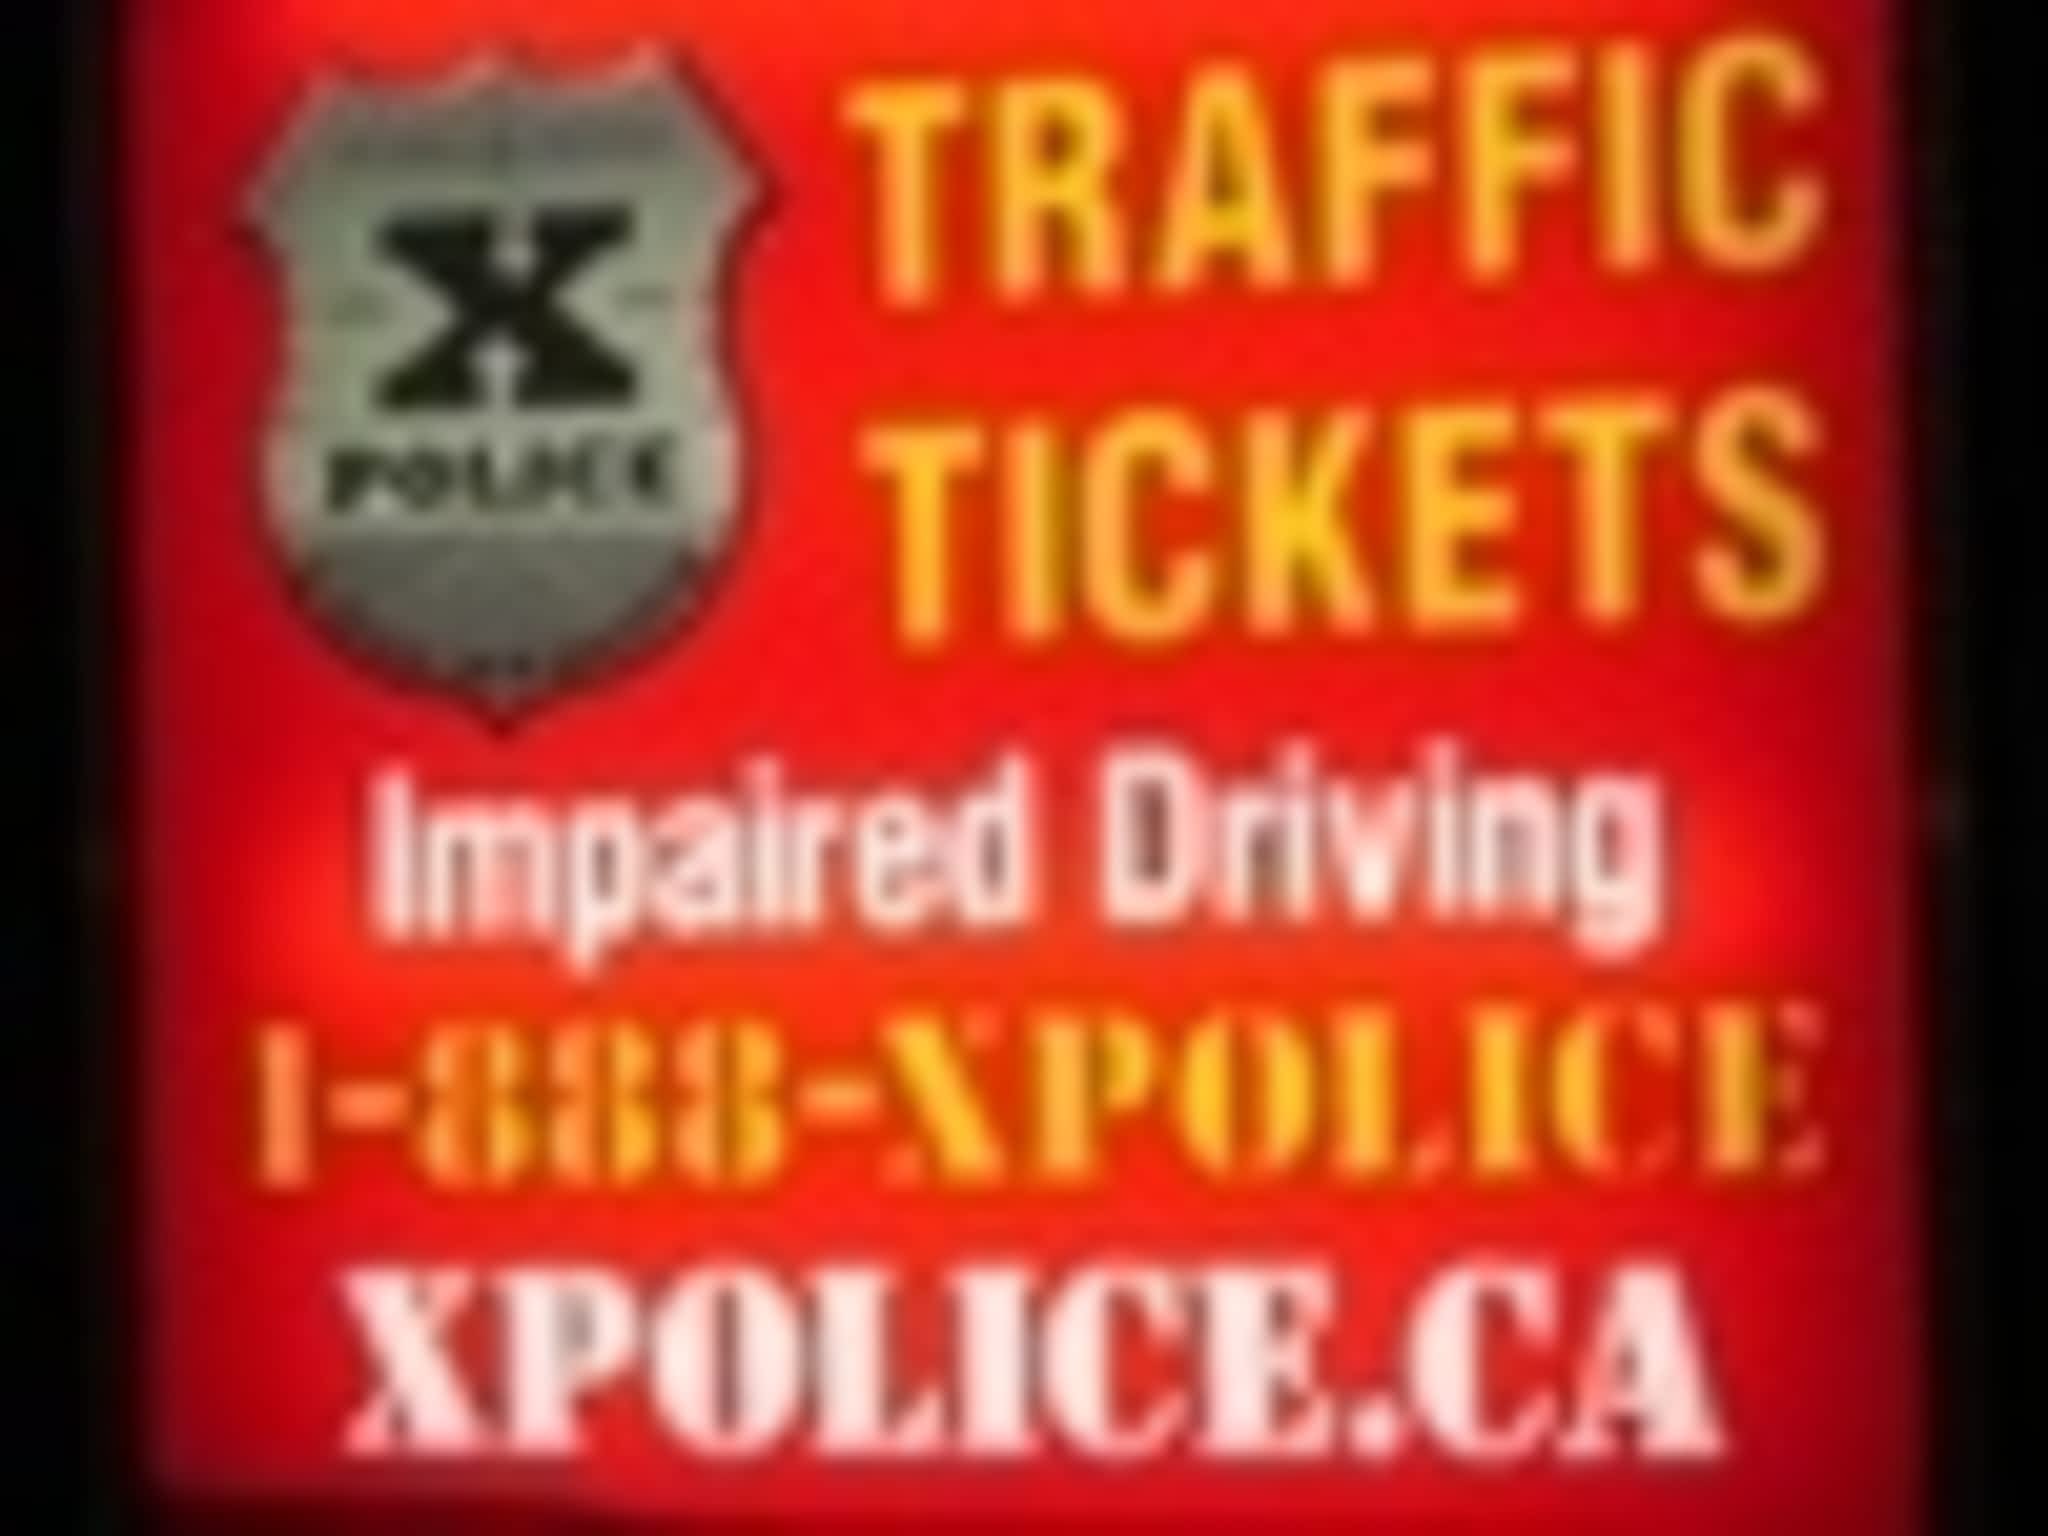 photo XPOLICE Traffic Ticket Services